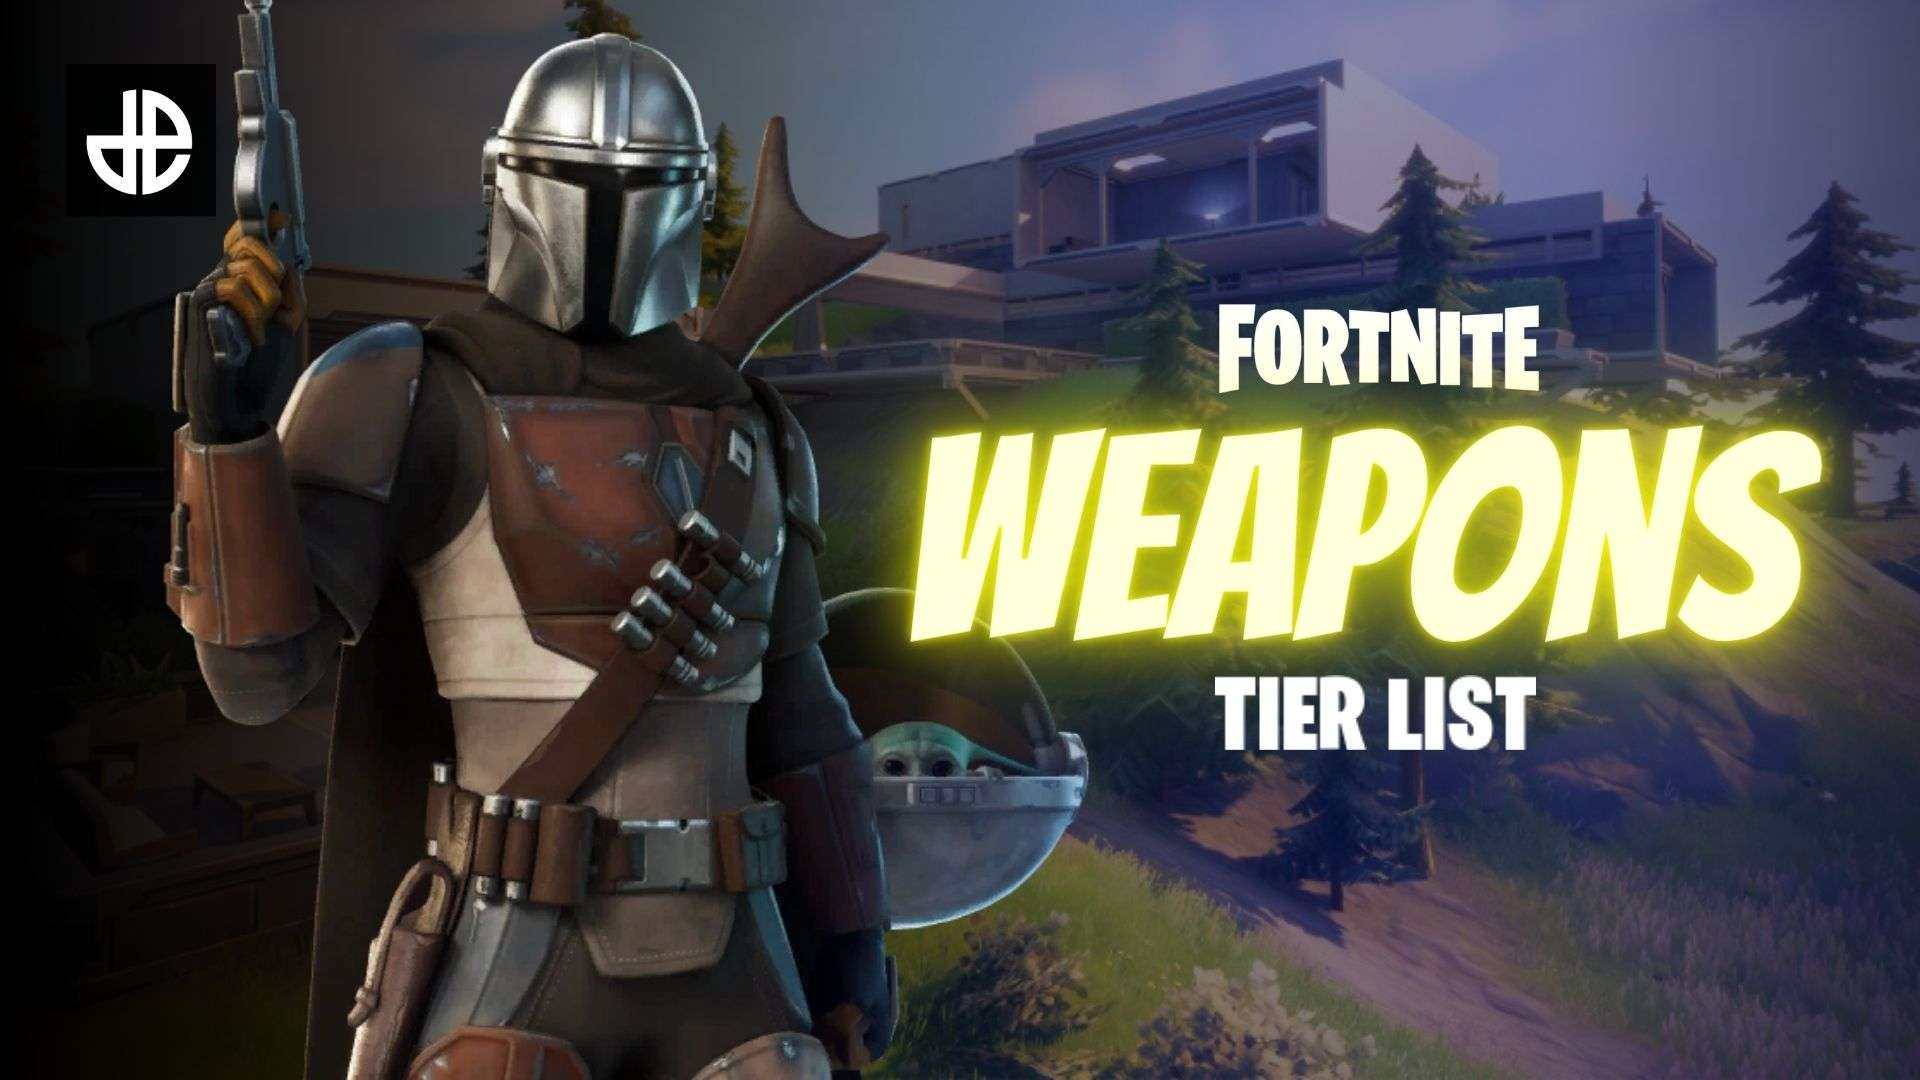 Fortnite weapons tier list image